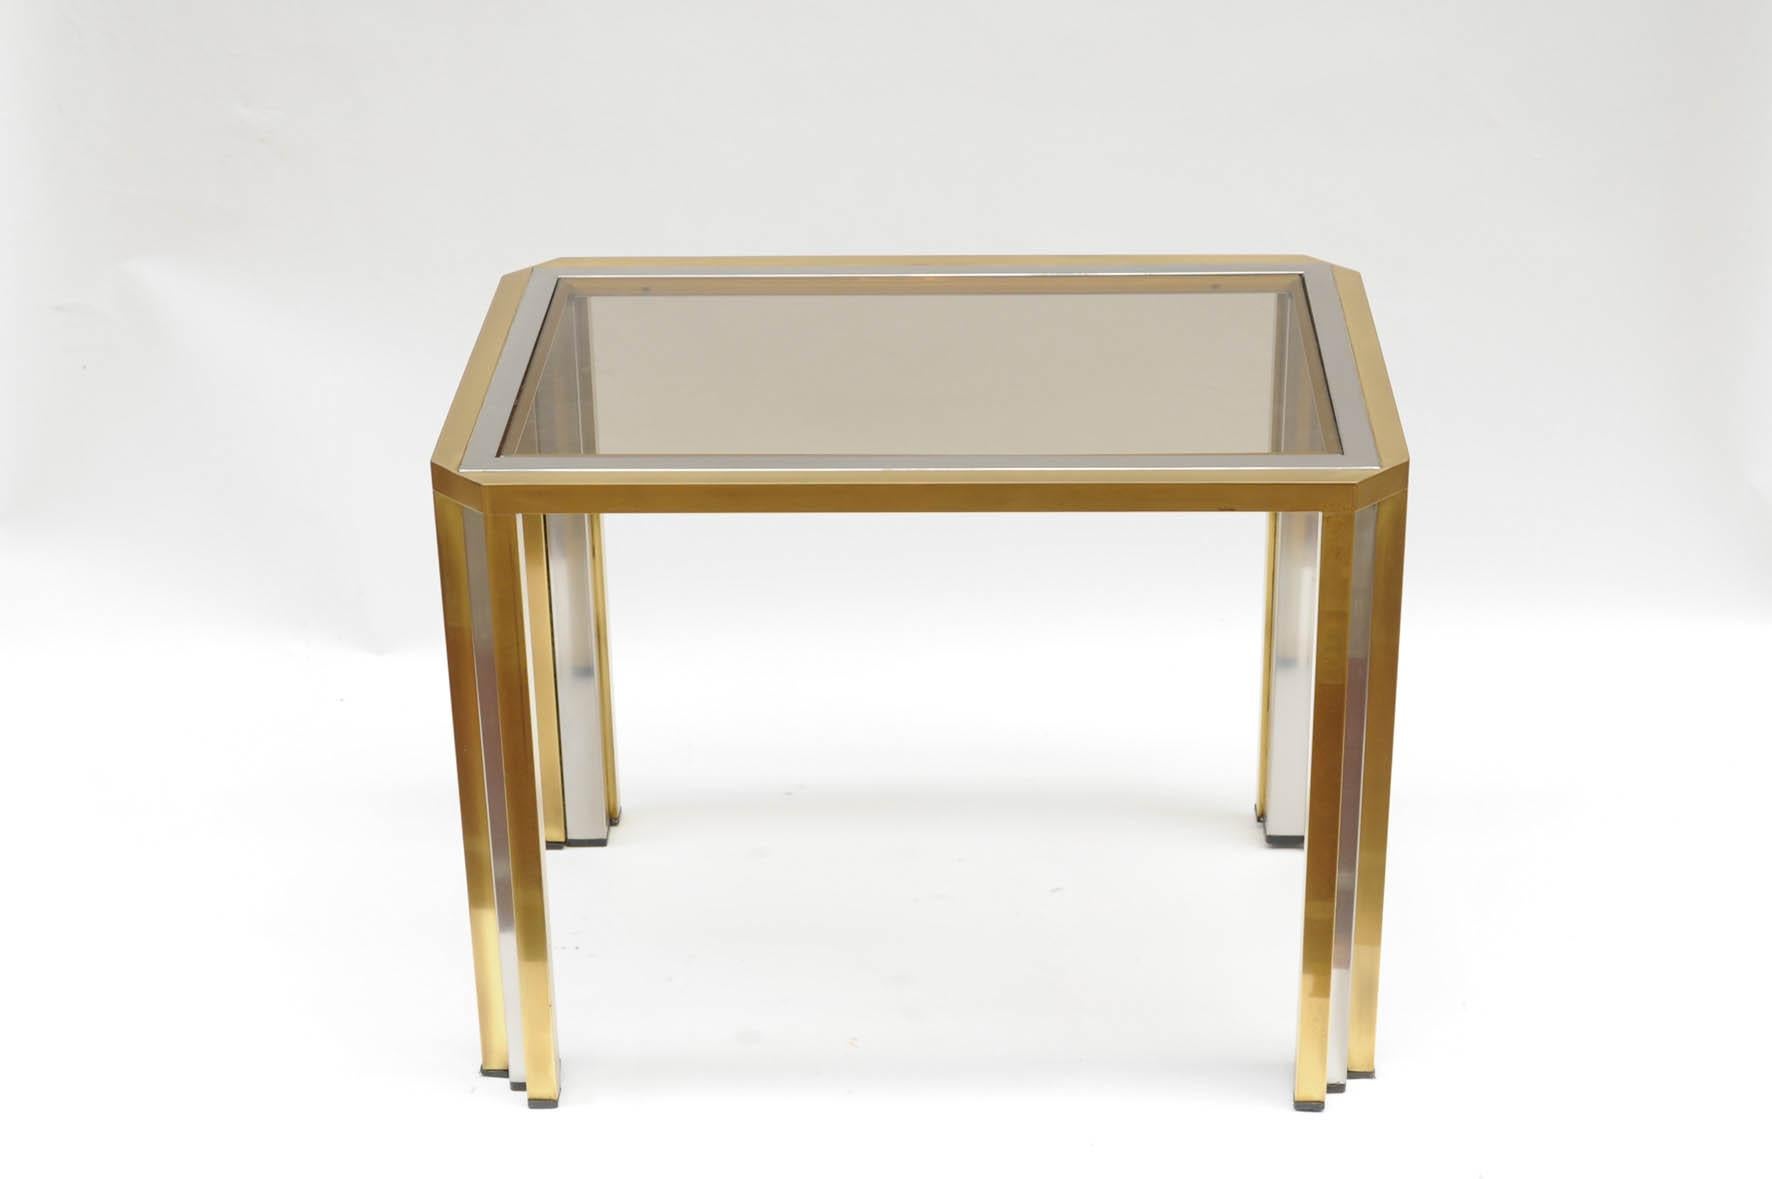 Pair of side tables in brass and stainless steel
with smoked glass.